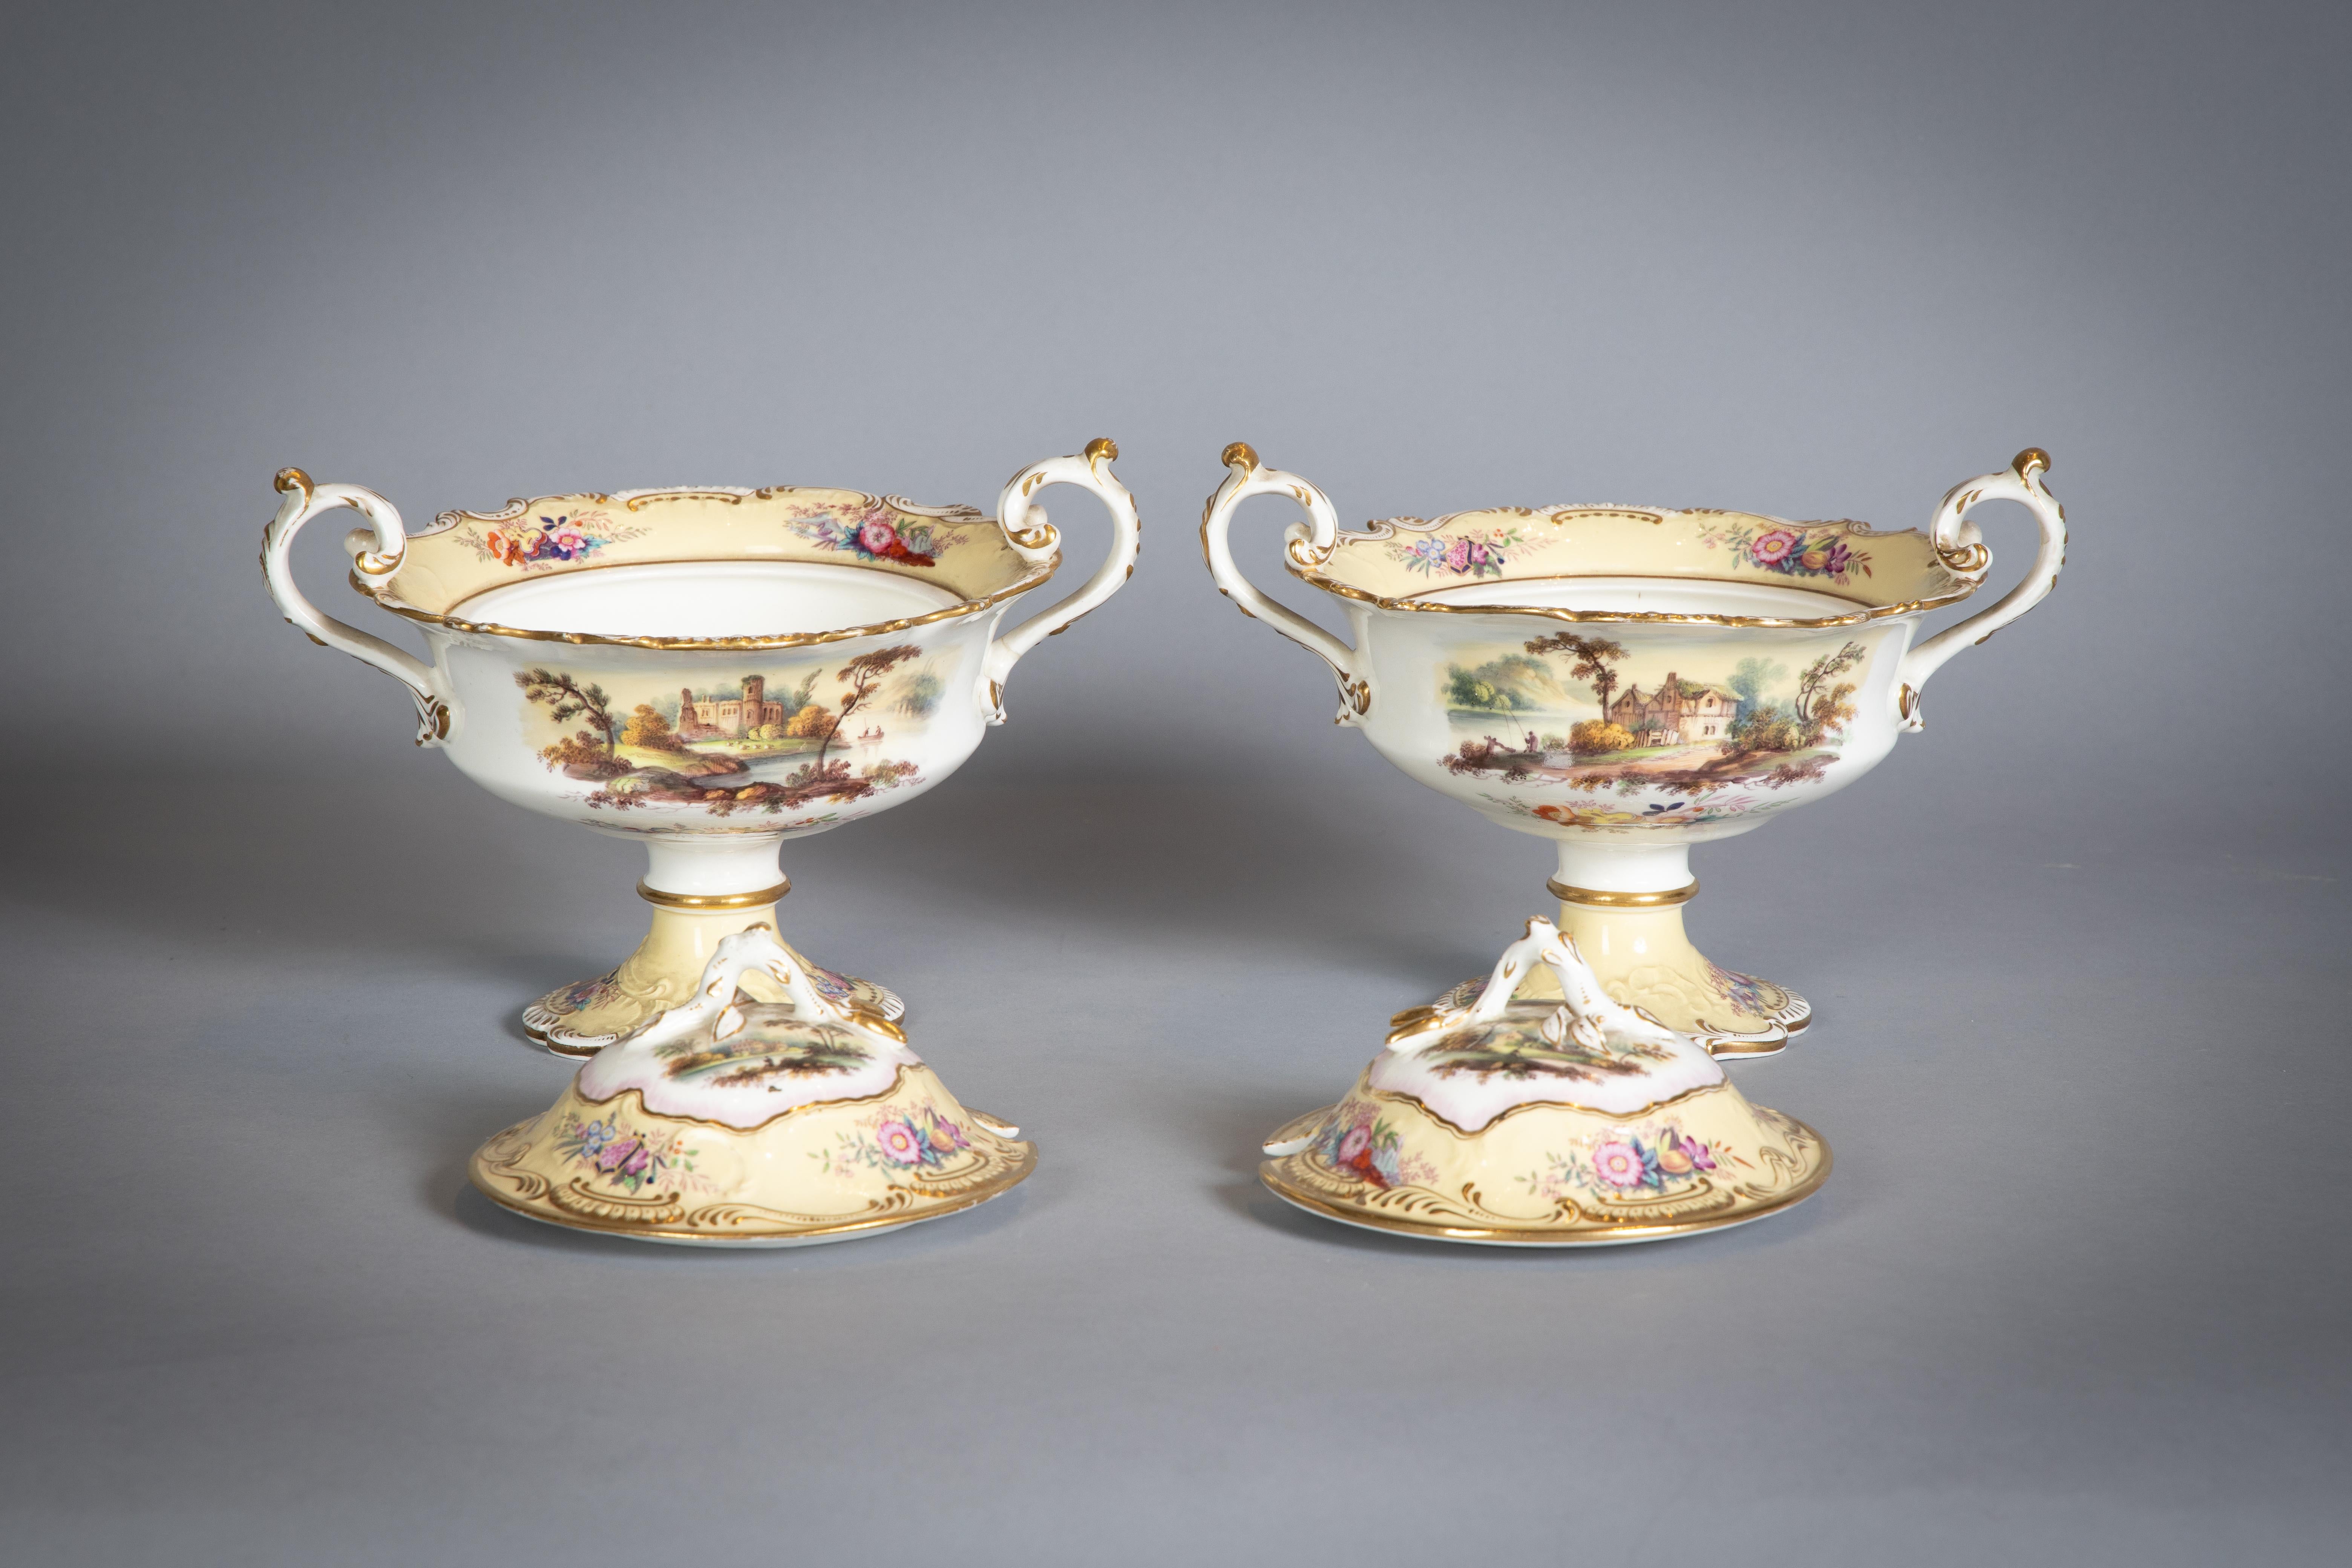 English Porcelain Dessert Service, circa 1820 In Good Condition For Sale In New York, NY